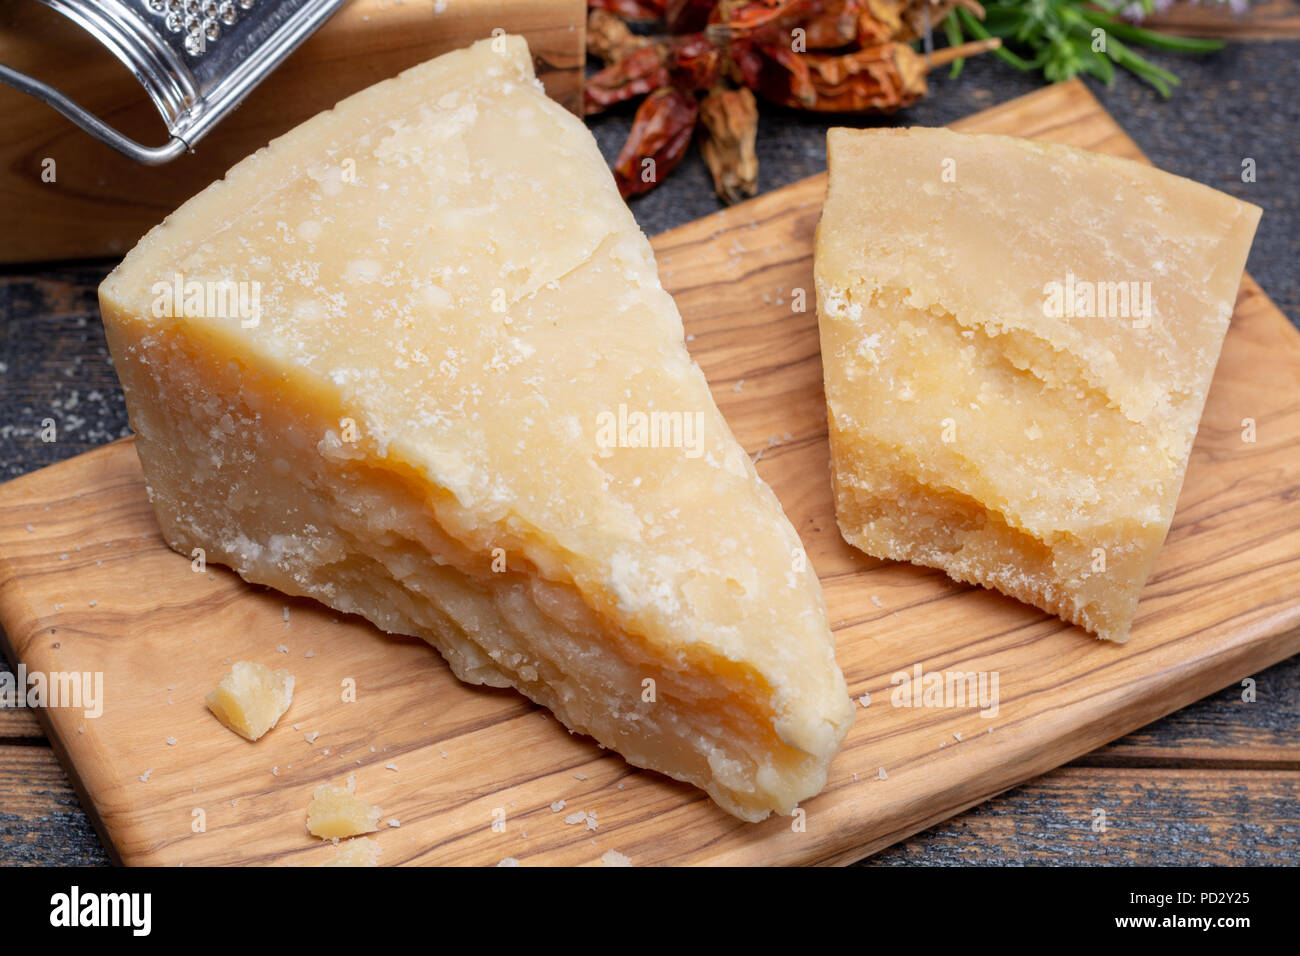 https://c8.alamy.com/comp/PD2Y25/traditional-italian-food-36-months-aged-in-caves-italian-parmesan-hard-cheese-from-parmigiano-reggiano-italy-PD2Y25.jpg